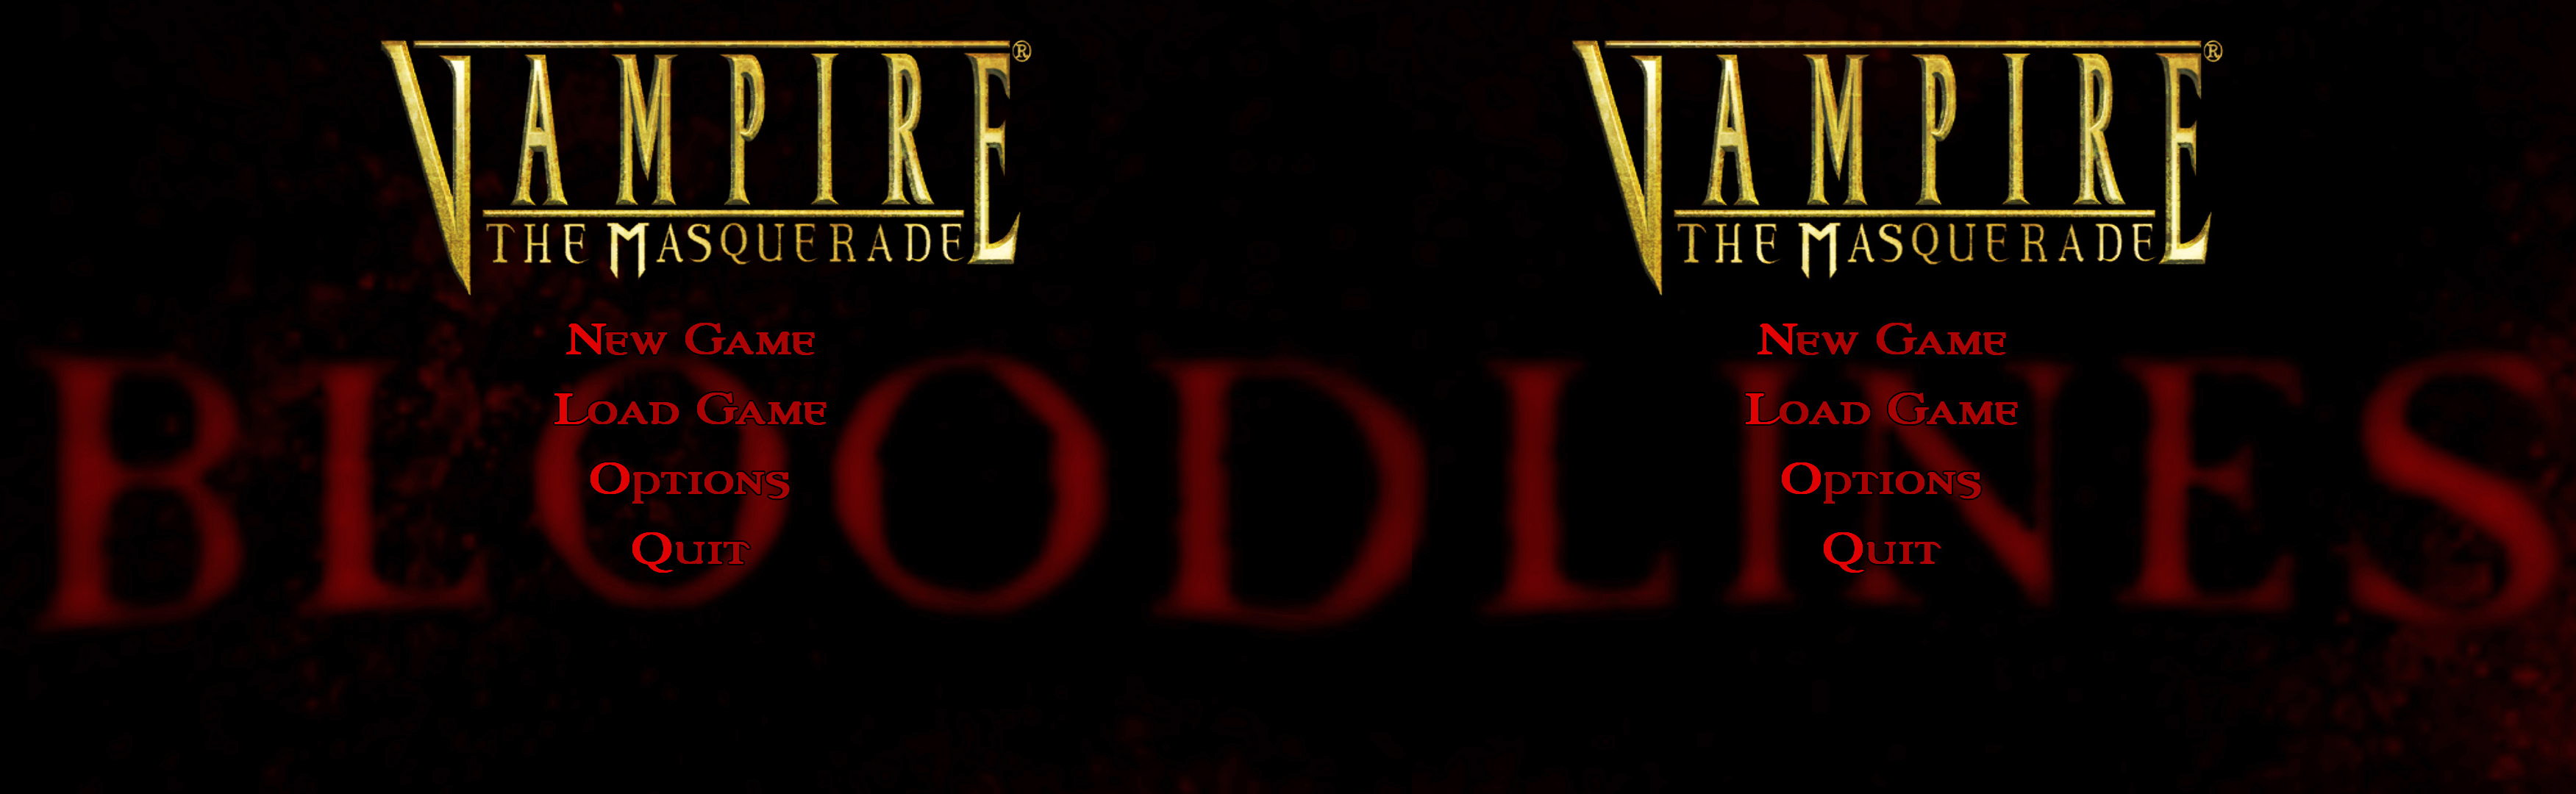 Small Worlds in Vampire: The Masquerade - Bloodlines - Green Man Gaming Blog